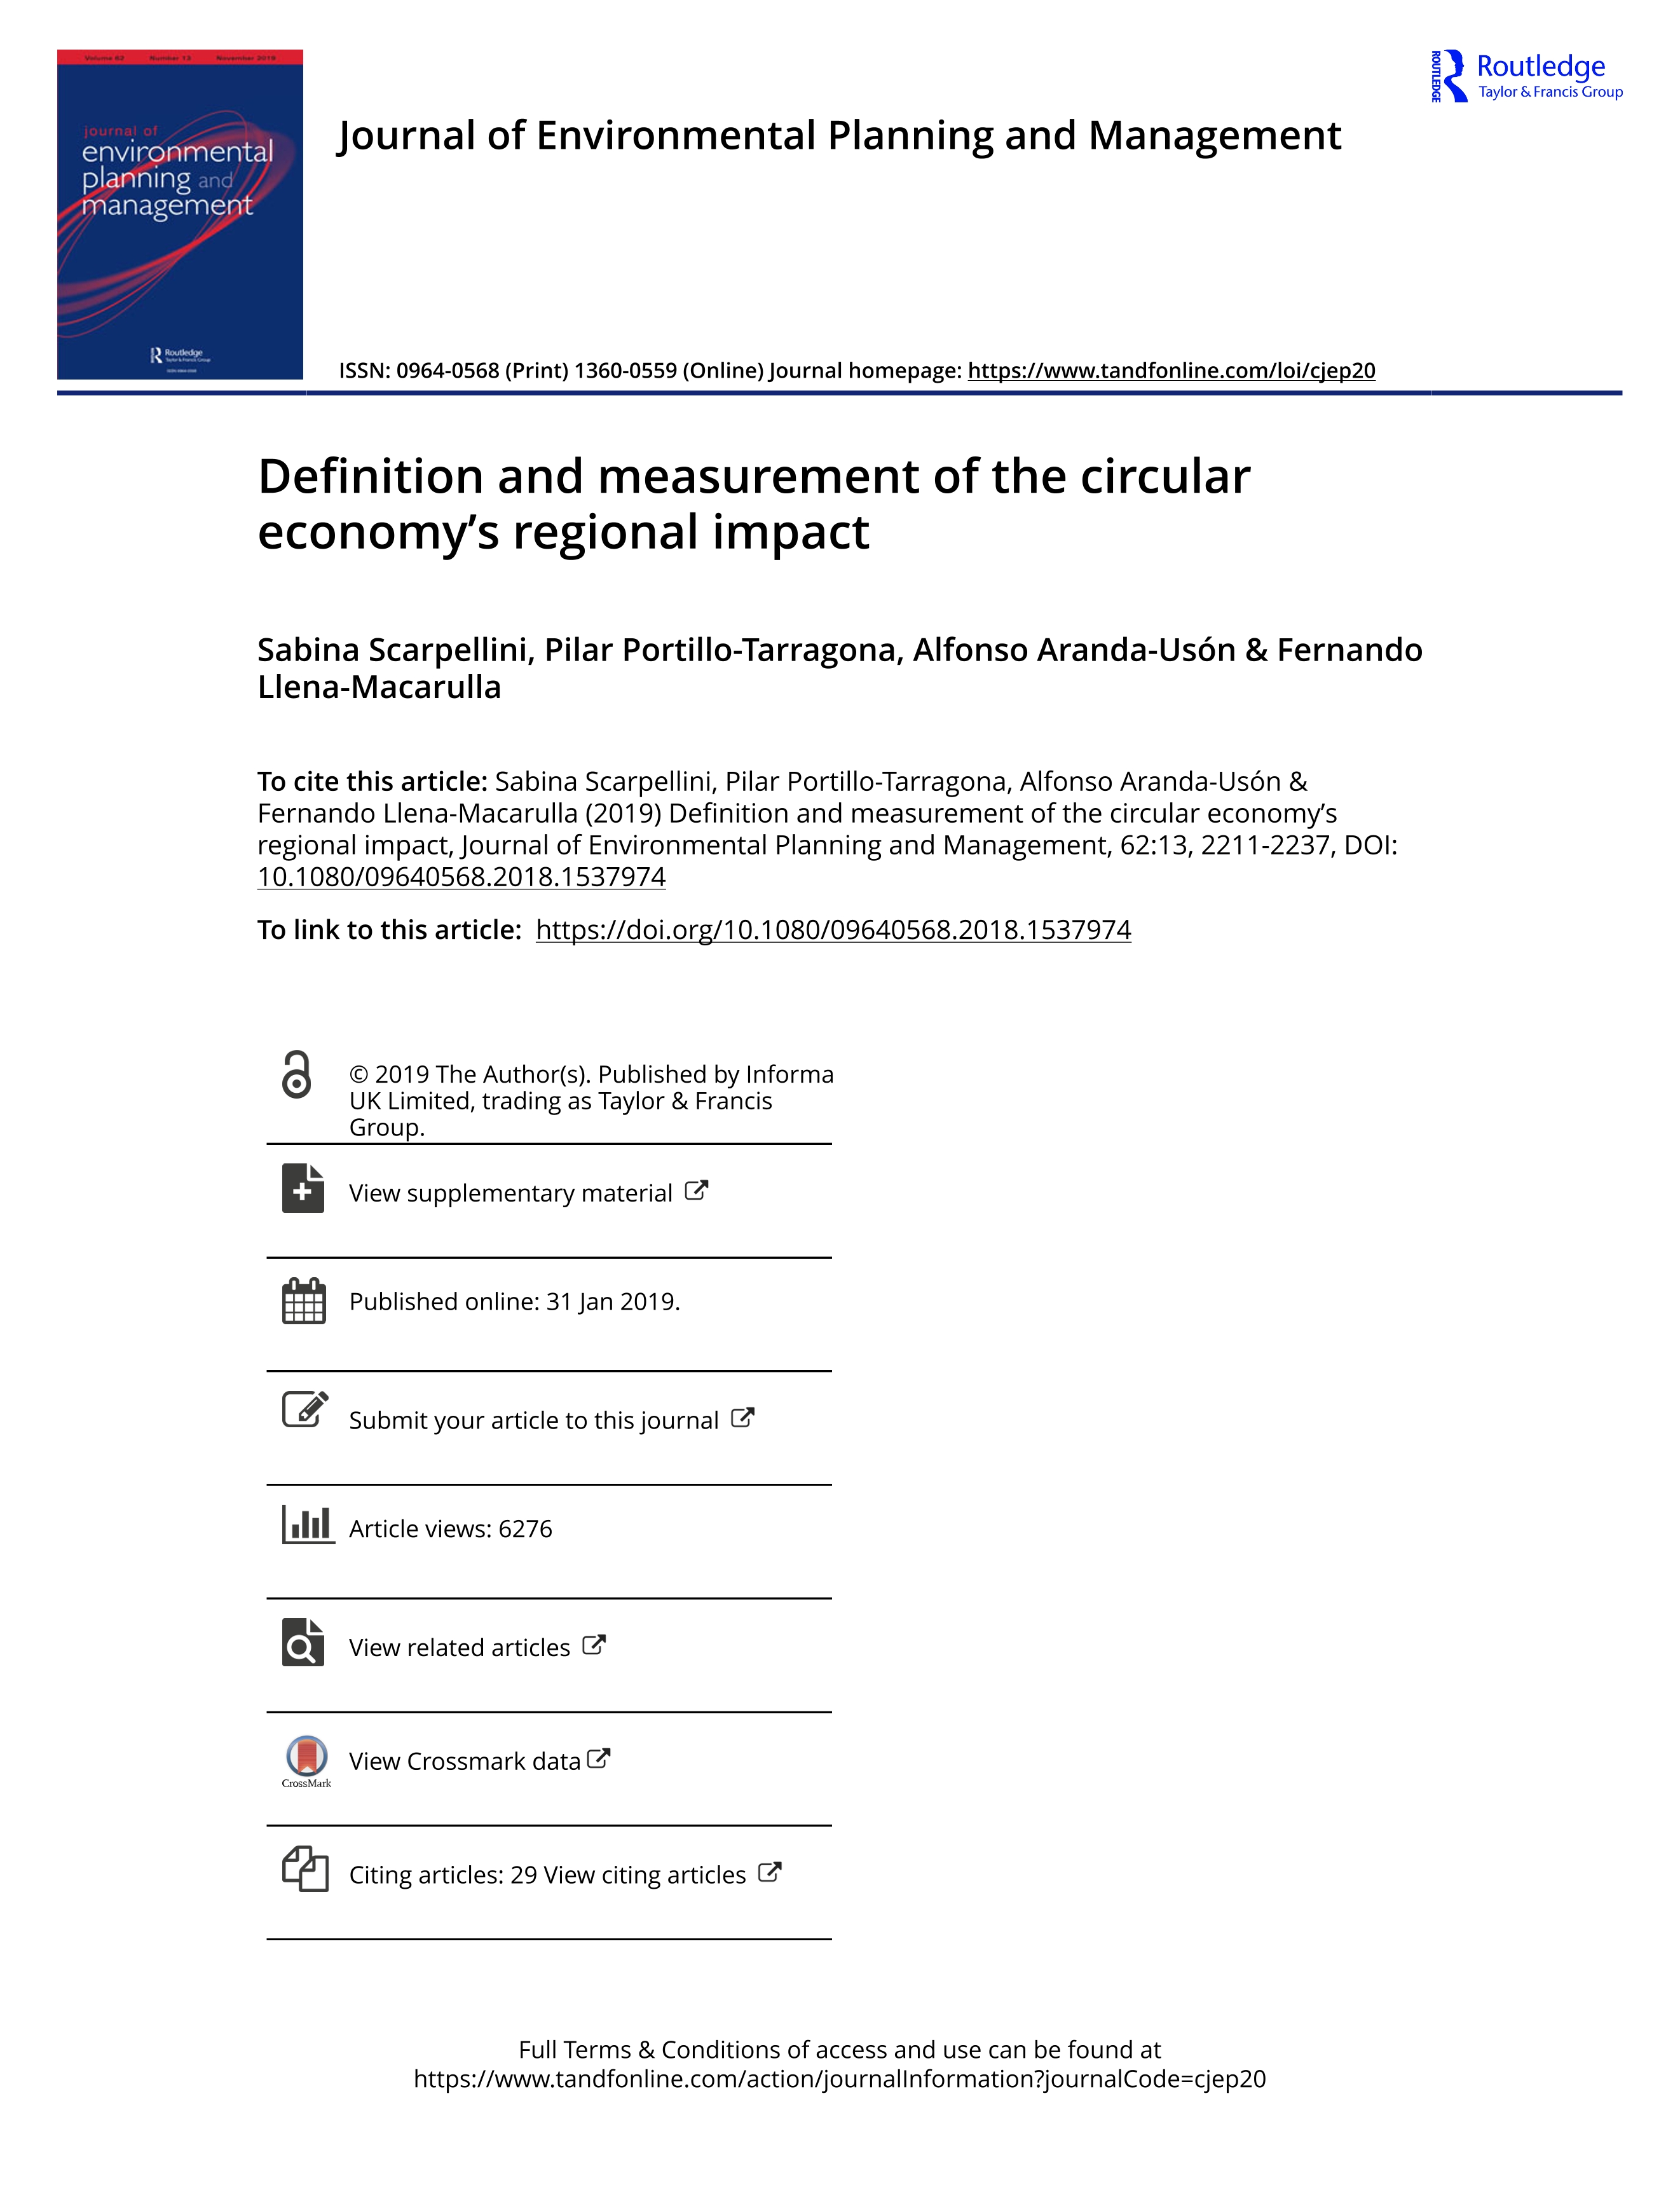 Definition and measurement of the circular economy’s regional impact